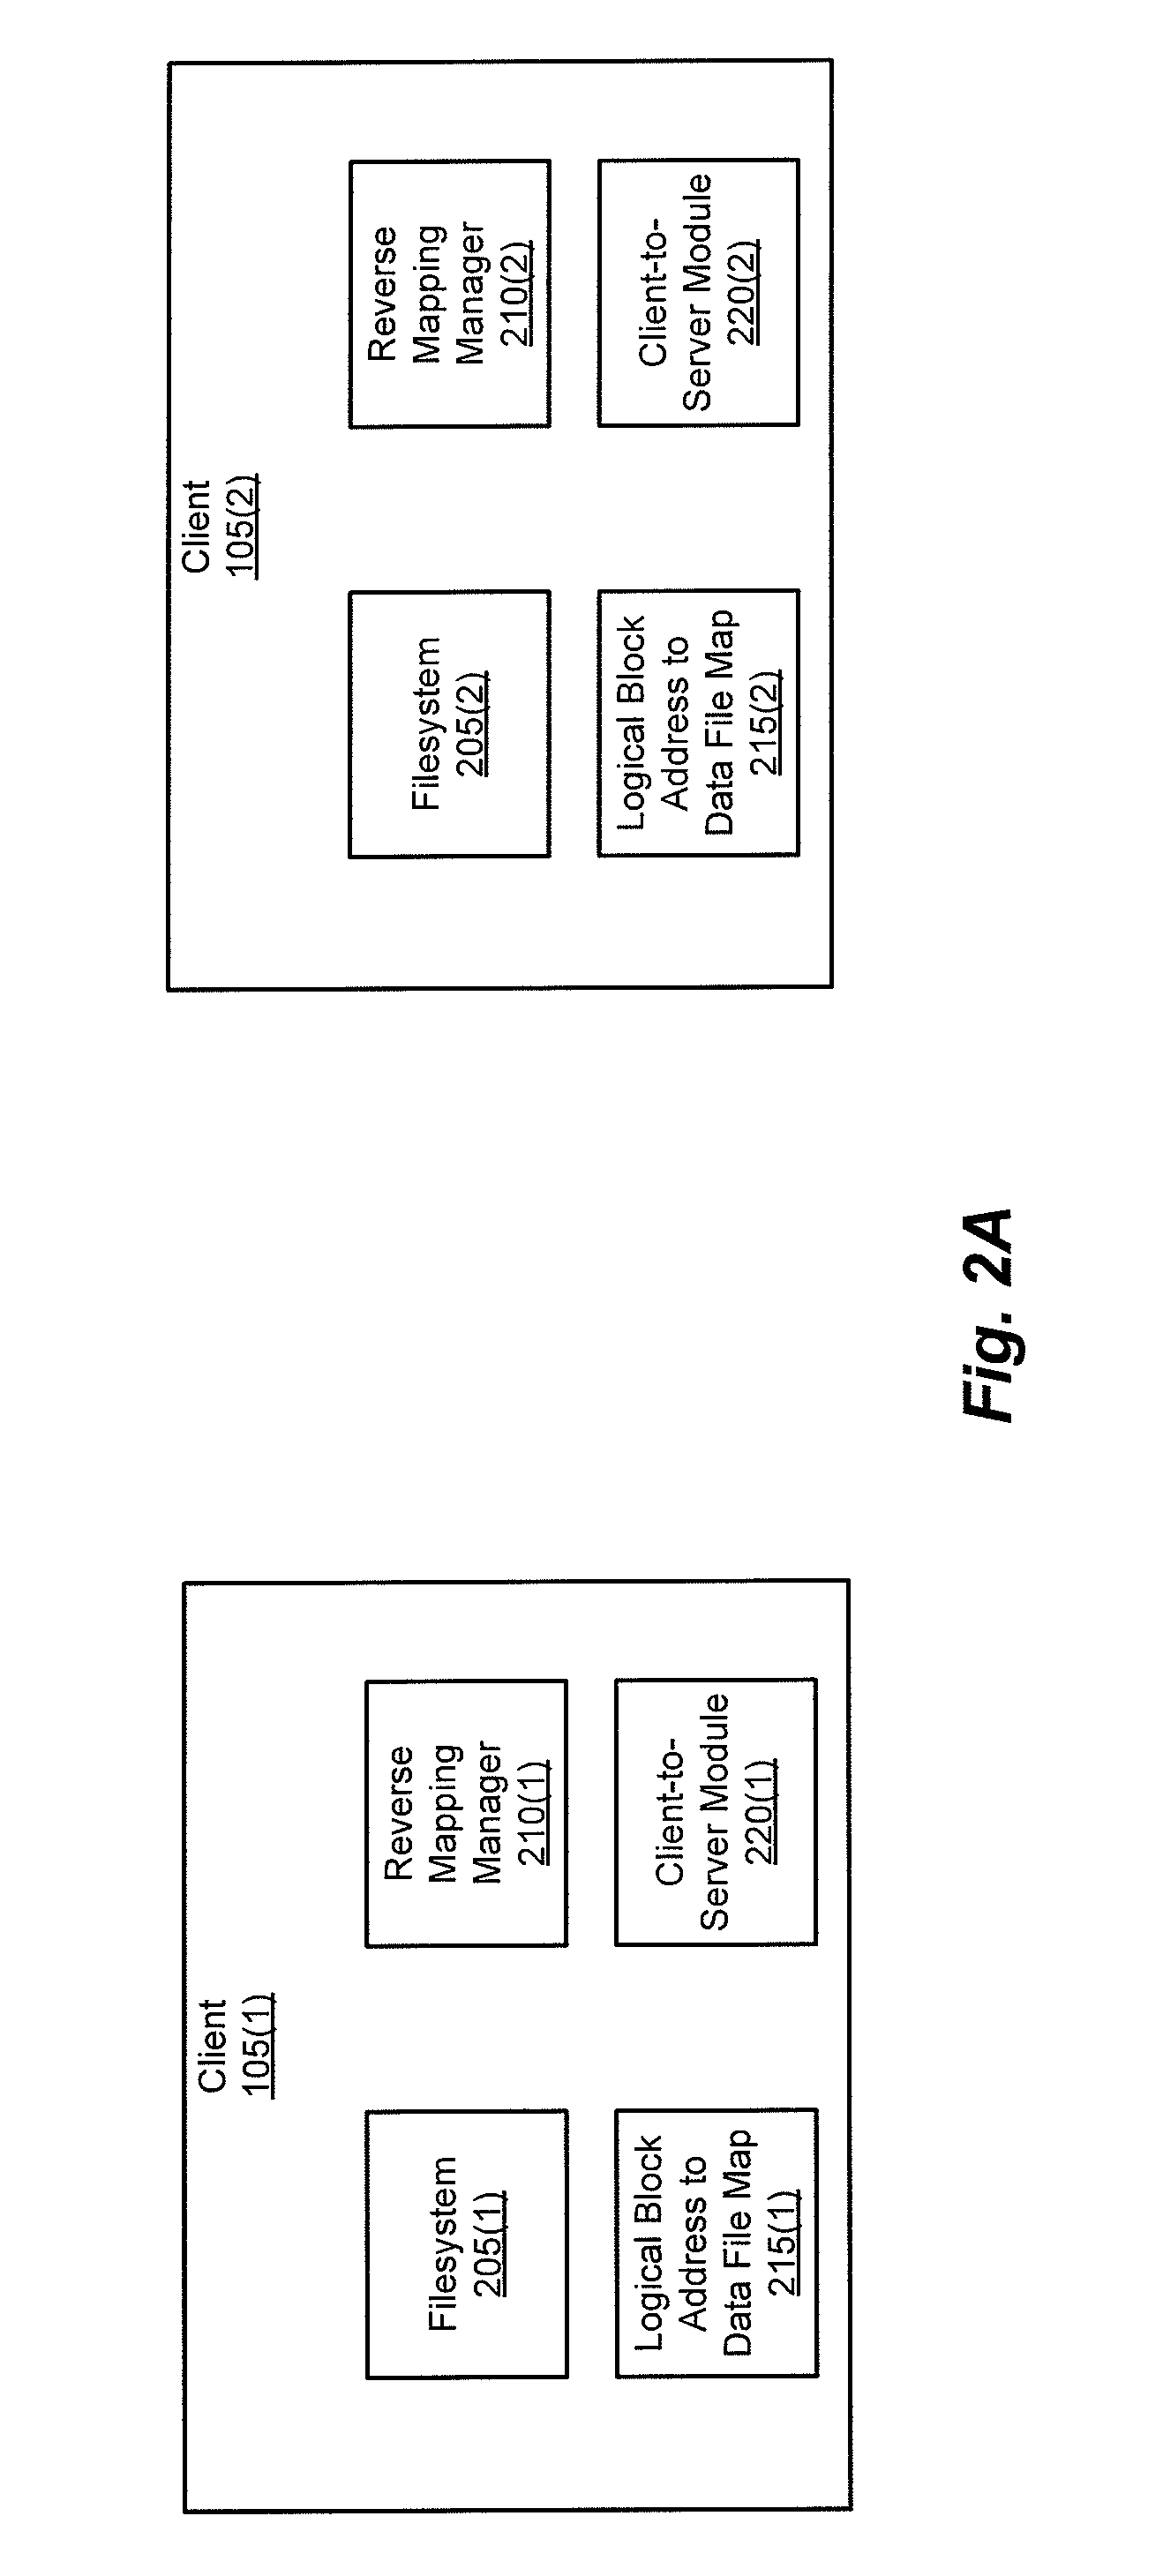 System and method for efficiently locating and processing data on a deduplication storage system